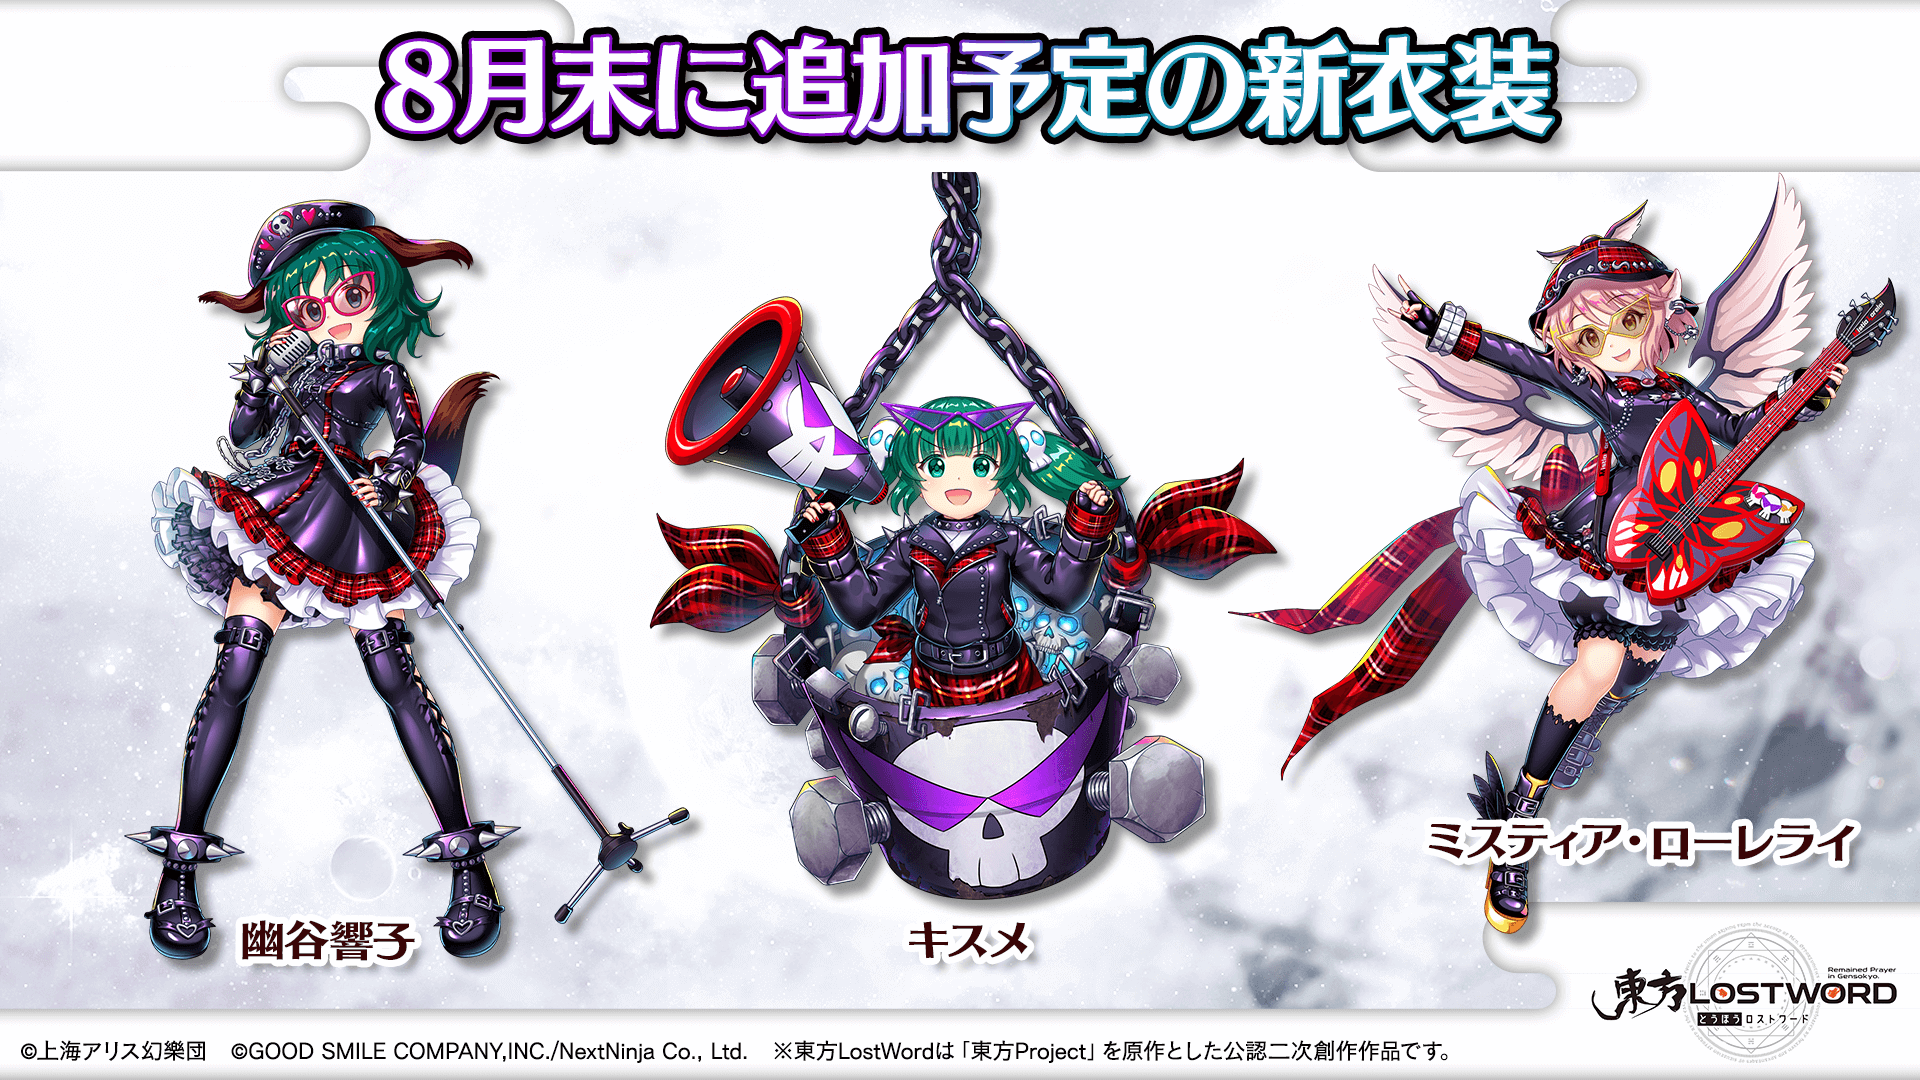 New Event Costumes for Kyouko, Kisume, and Mystia